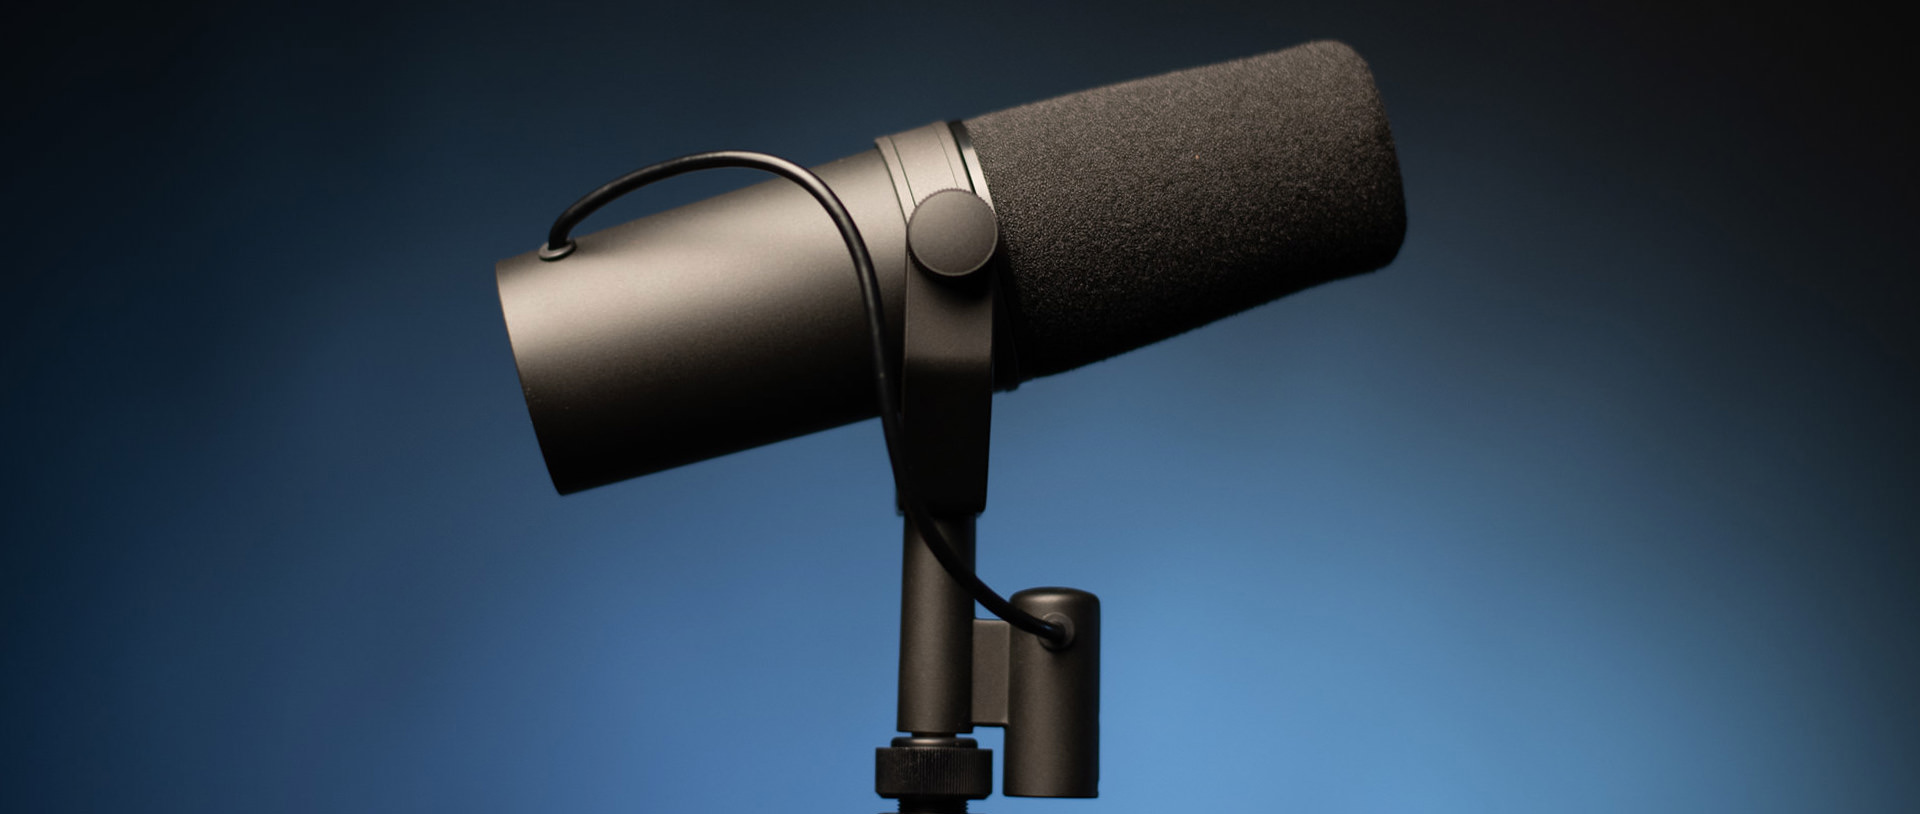 Shure Sm7b Review Is It Really The Best Podcasting Mic Not So Ancient Chinese Secrets